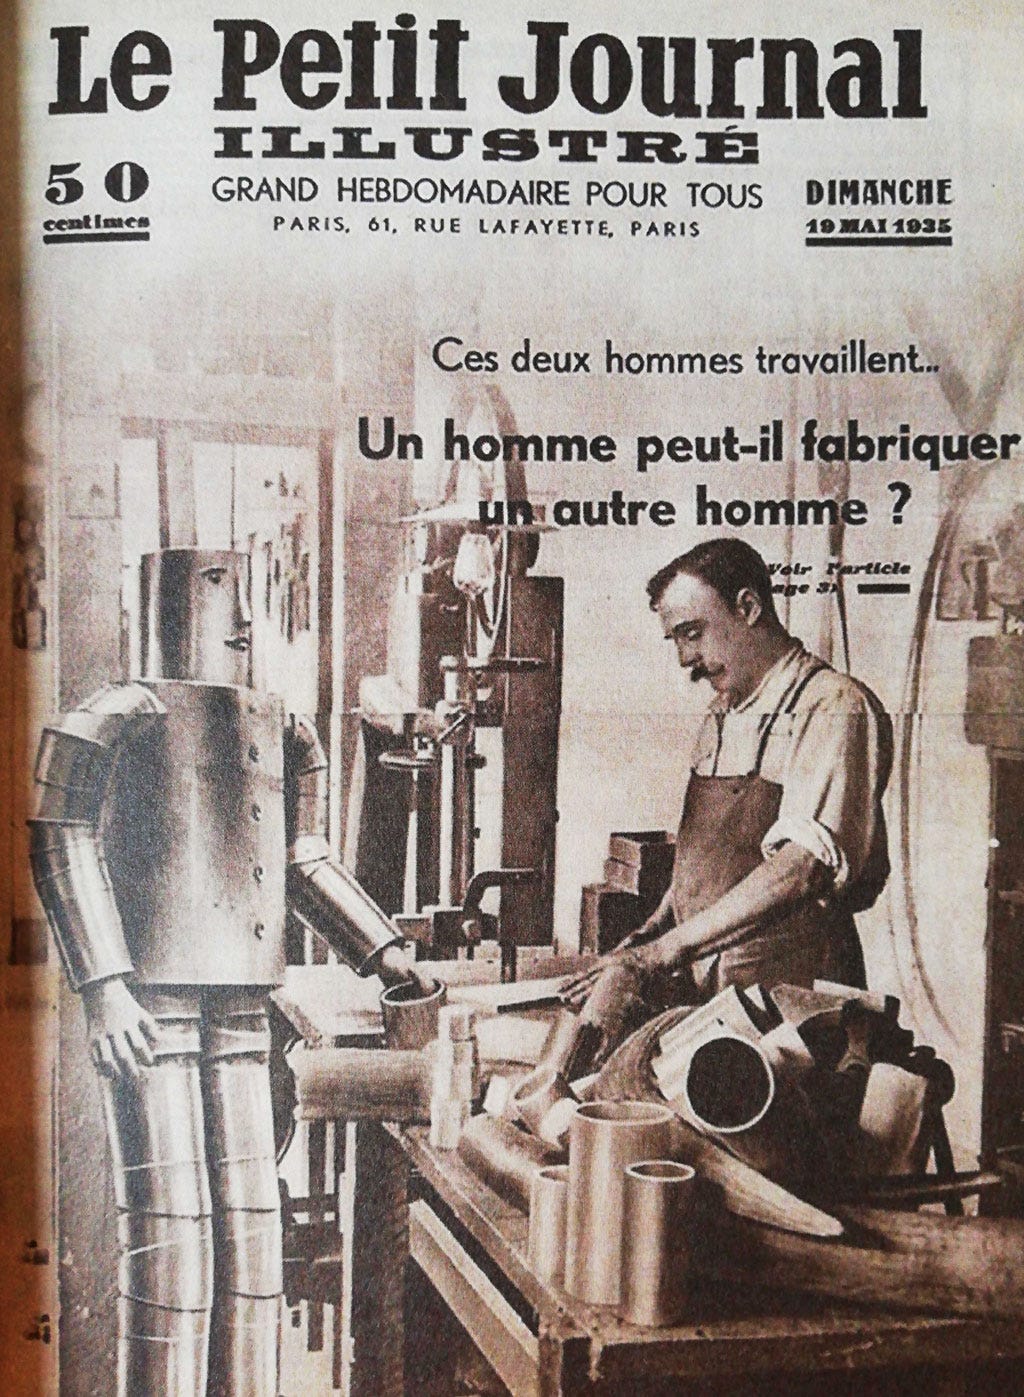 Cover of the “Le Petit Journal illustré” of May 1935, illustrating two workers, a man of flesh and bone and a humanoid of iron. The one building the other.